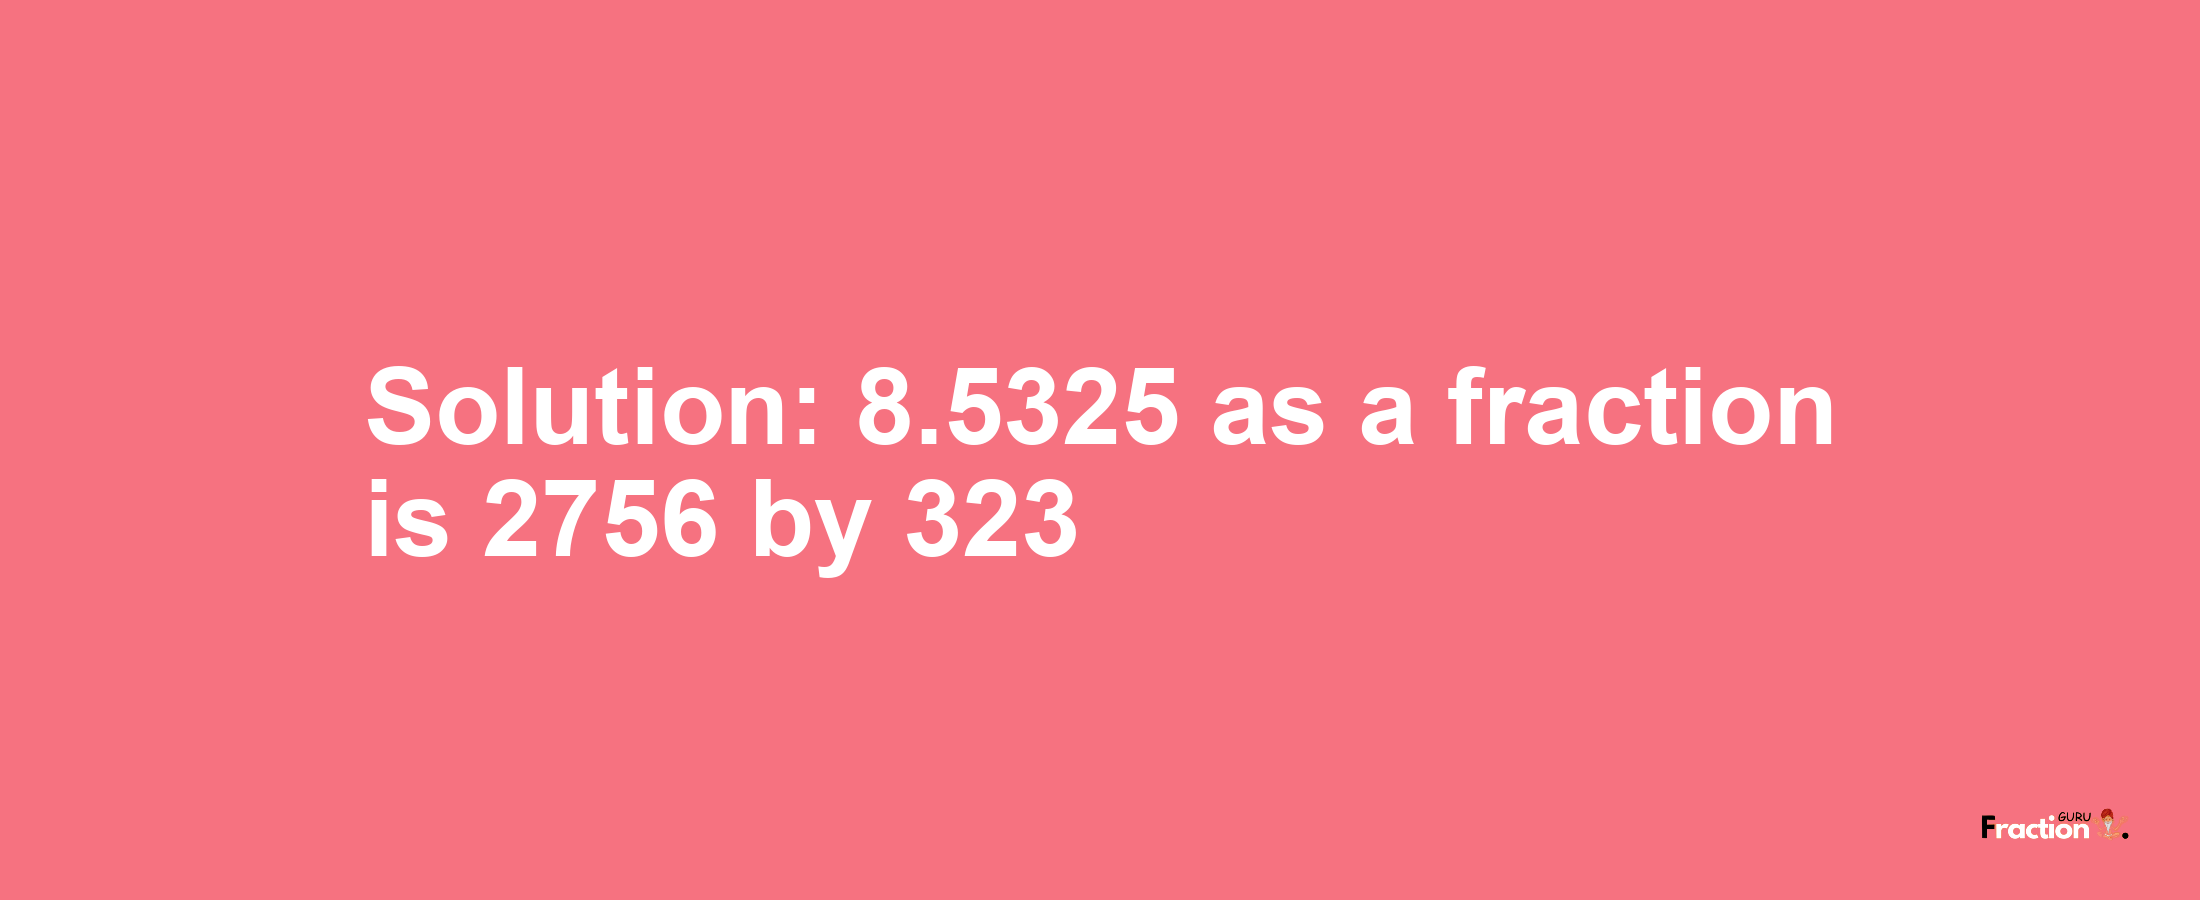 Solution:8.5325 as a fraction is 2756/323